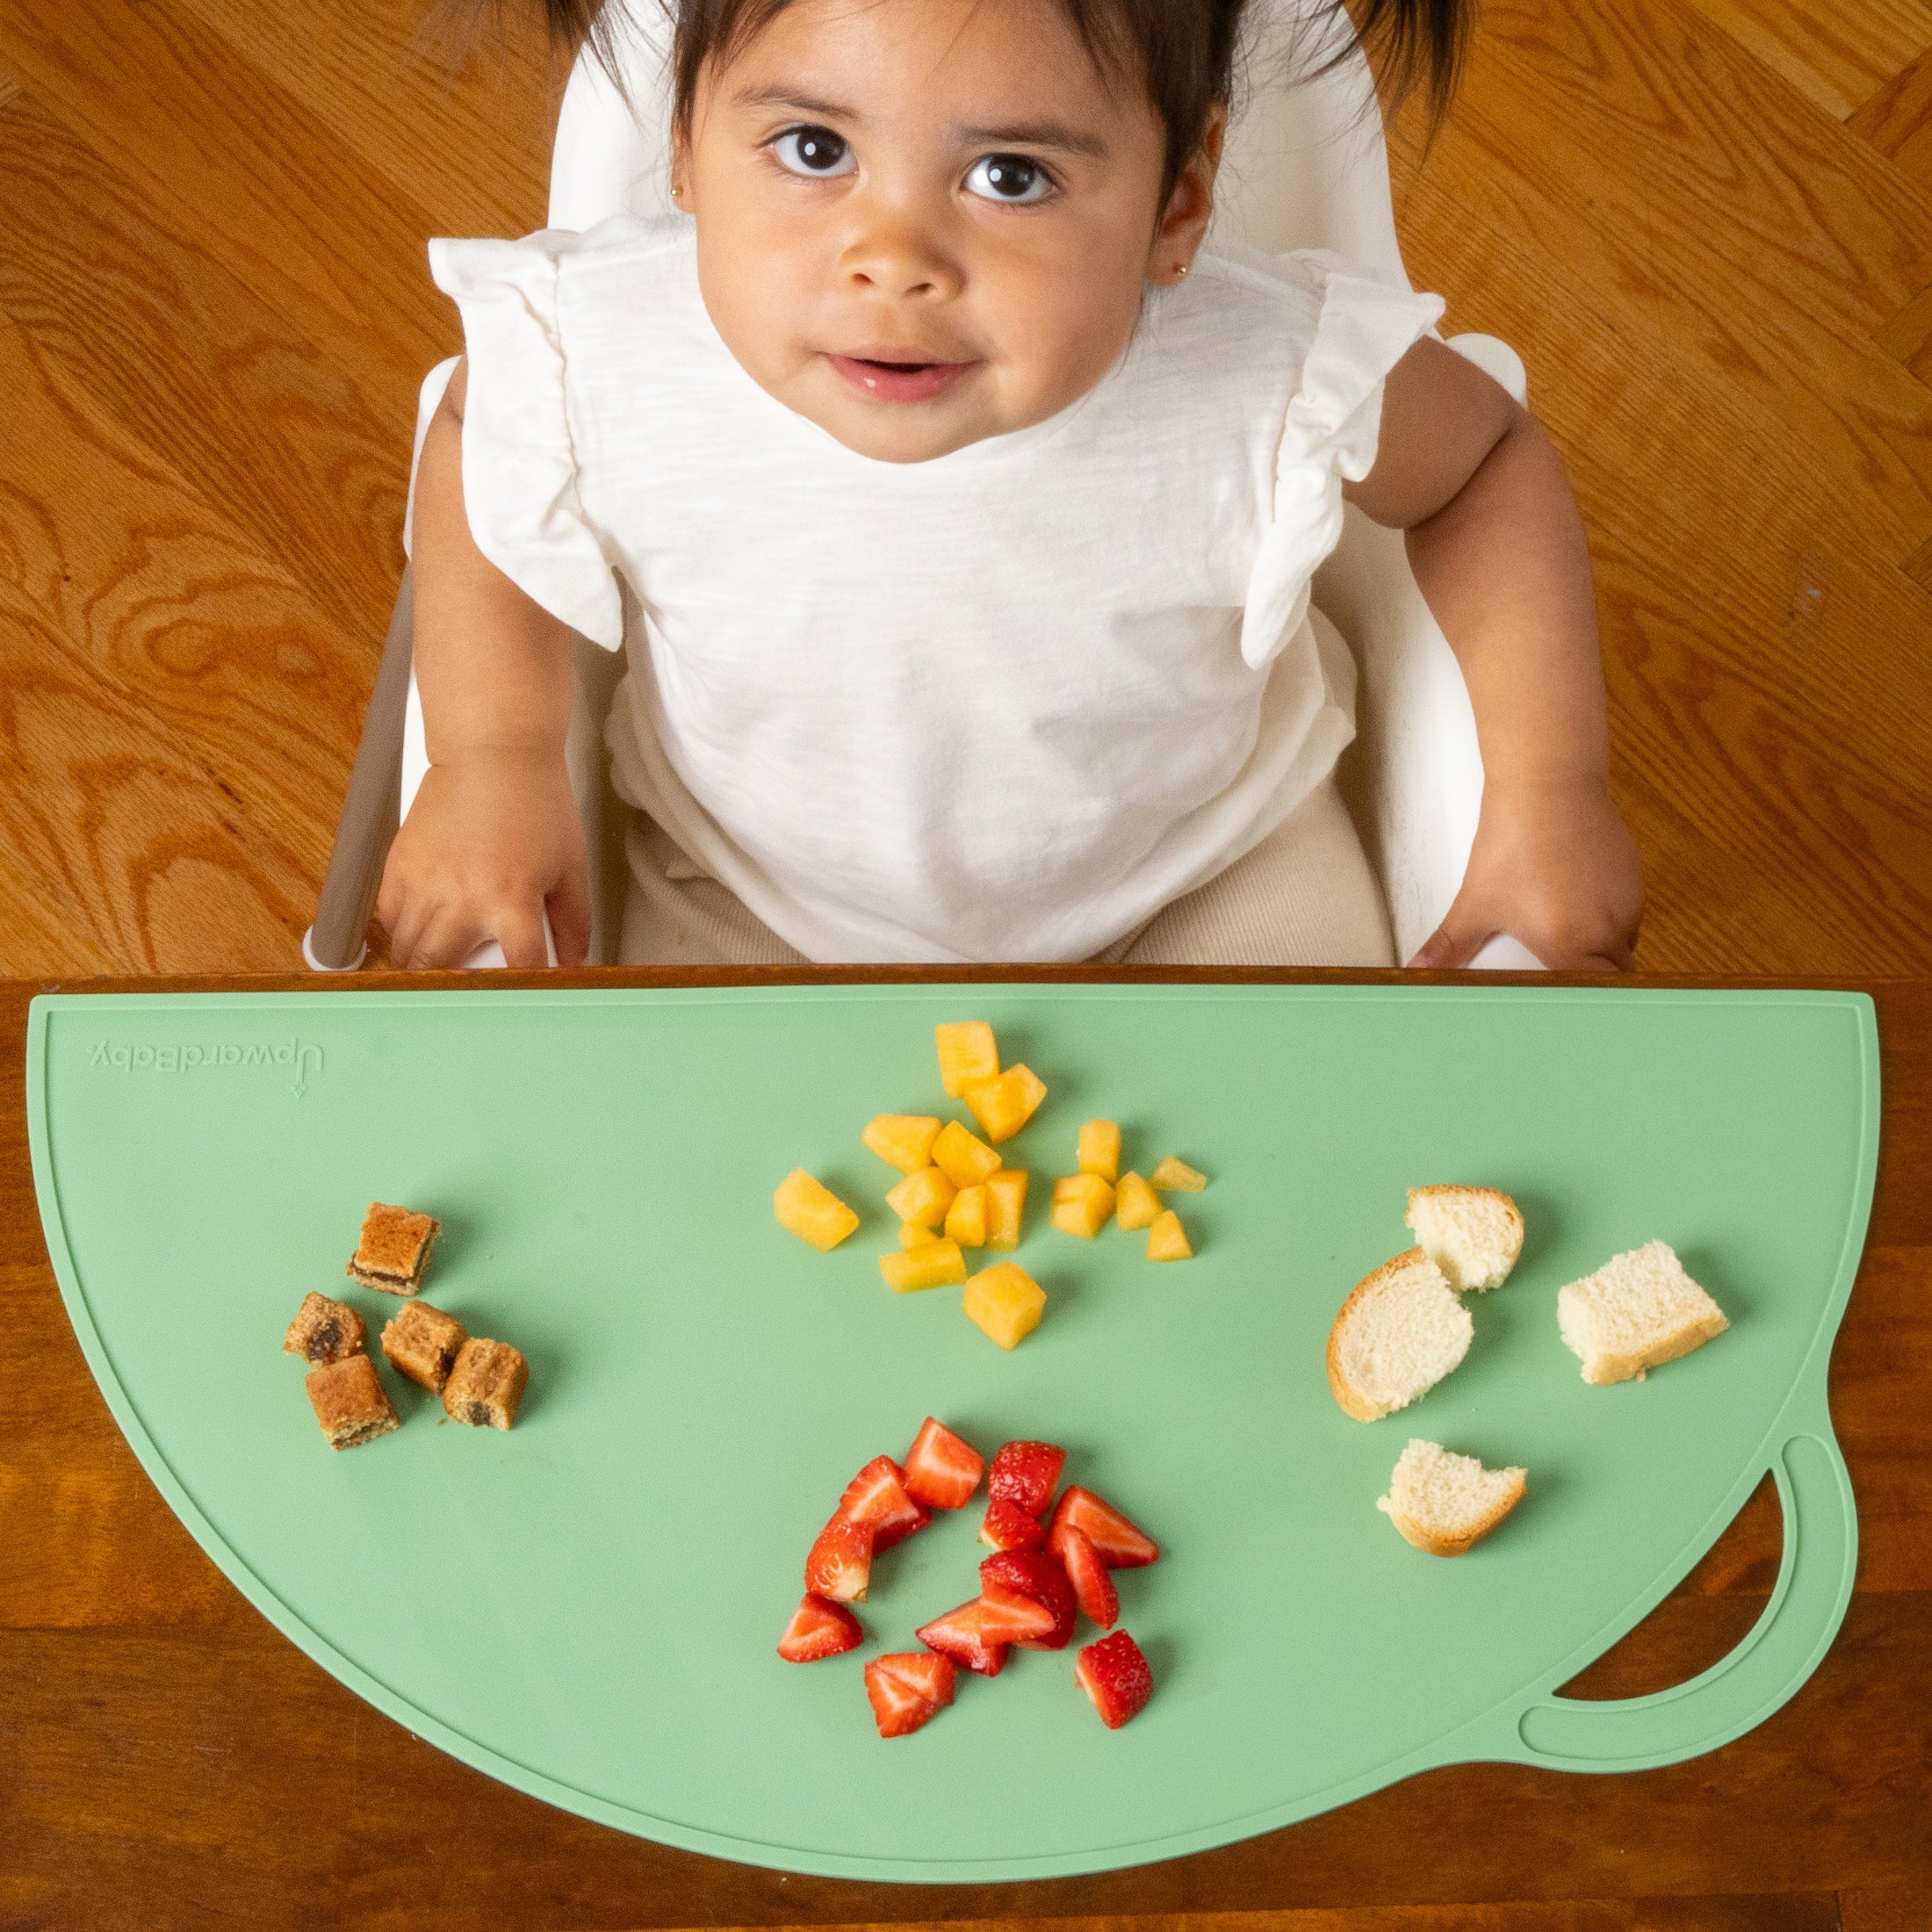 Suction Placemat  - BPA Free - 100% Food-Grade Silicone - 6m+